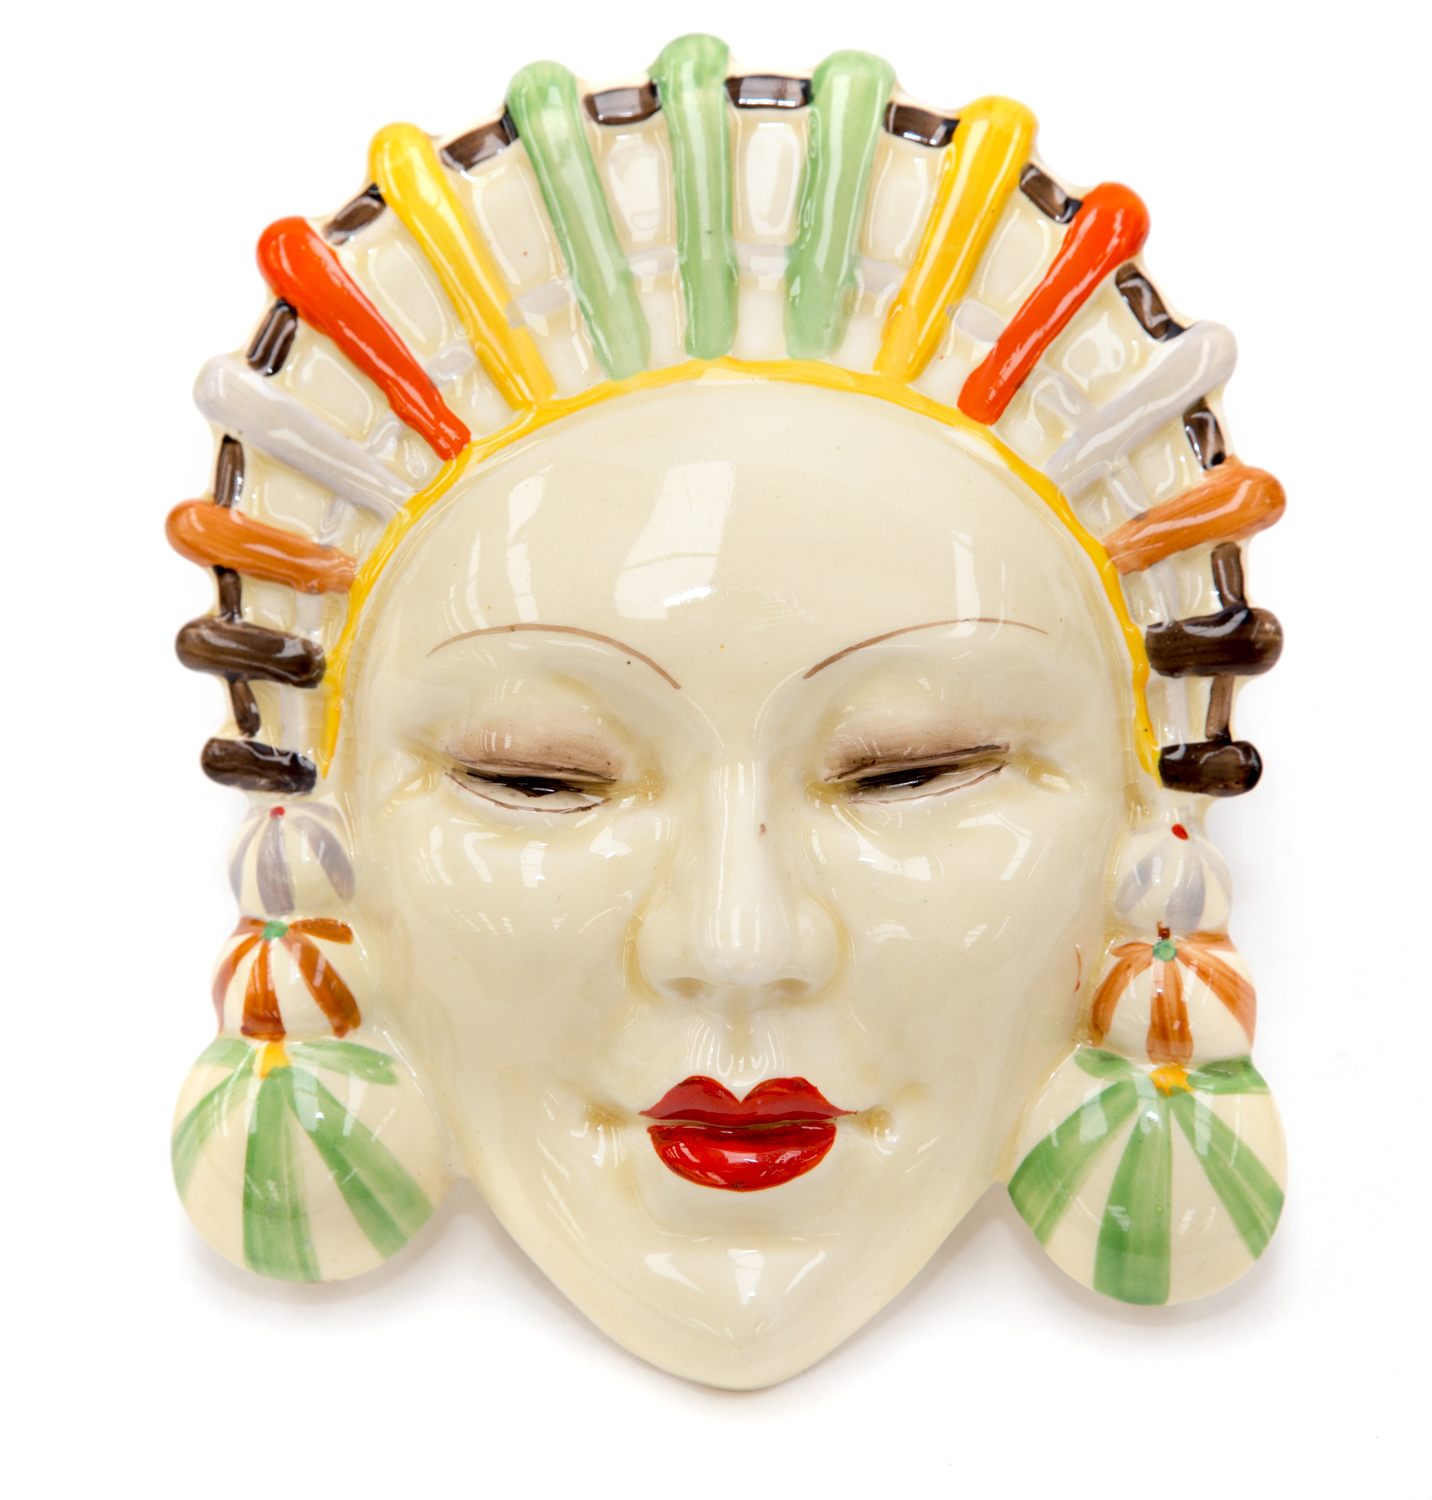 A Clarice Cliff Wilkinson's wall plaque moulded as an Oriental Lady wearing a headdress, printed